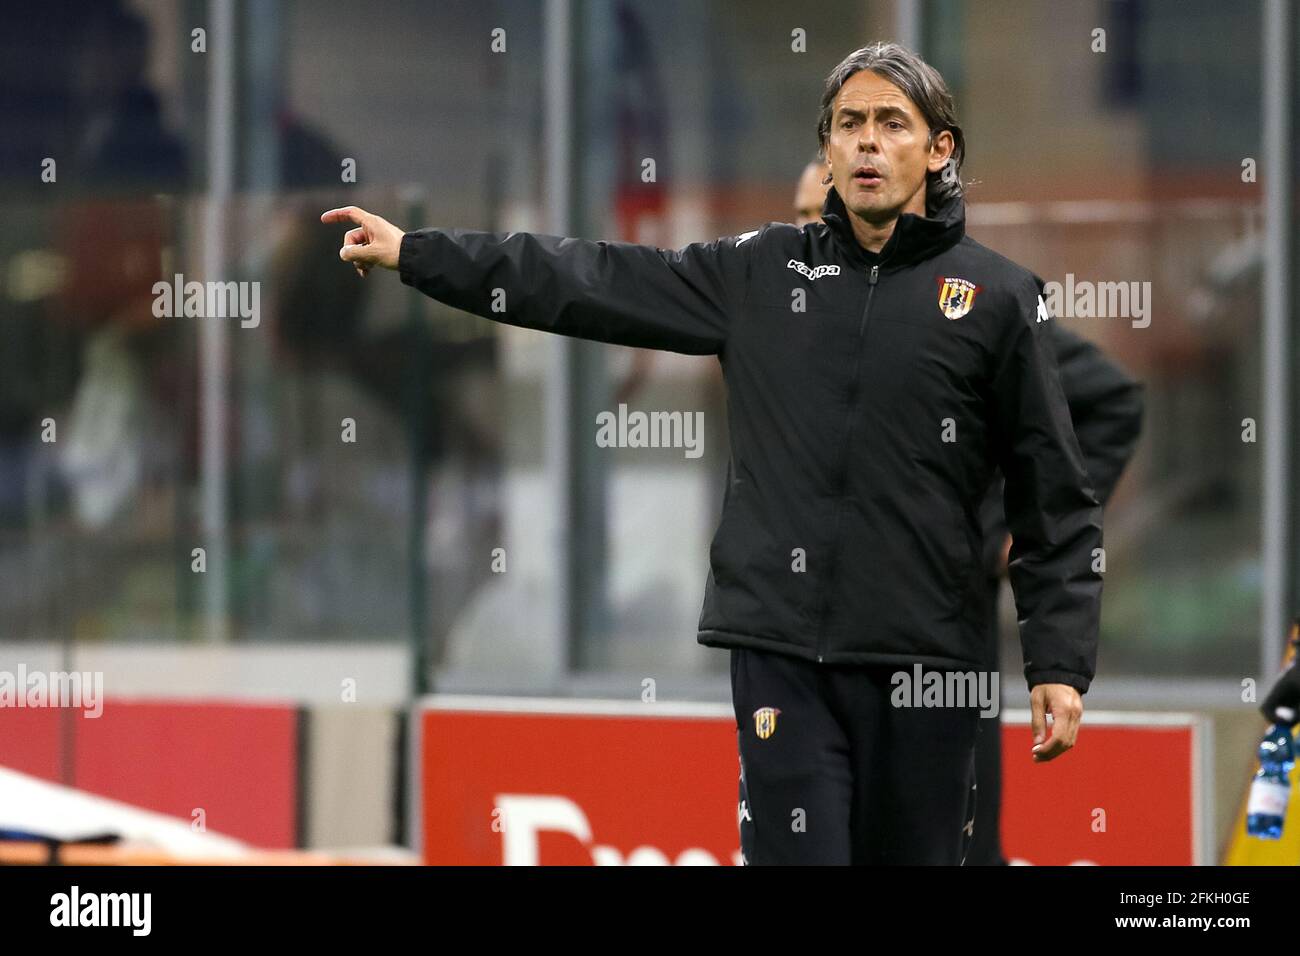 MILAN, ITALY - MAY 1: coach Filippo Inzaghi of Benevento during the Serie A match between AC Milan and Benevento at Stadio Giuseppe Meazza on May 1, 2021 in Milan, Italy (Photo by Ciro Santangelo/Orange Pictures) Stock Photo